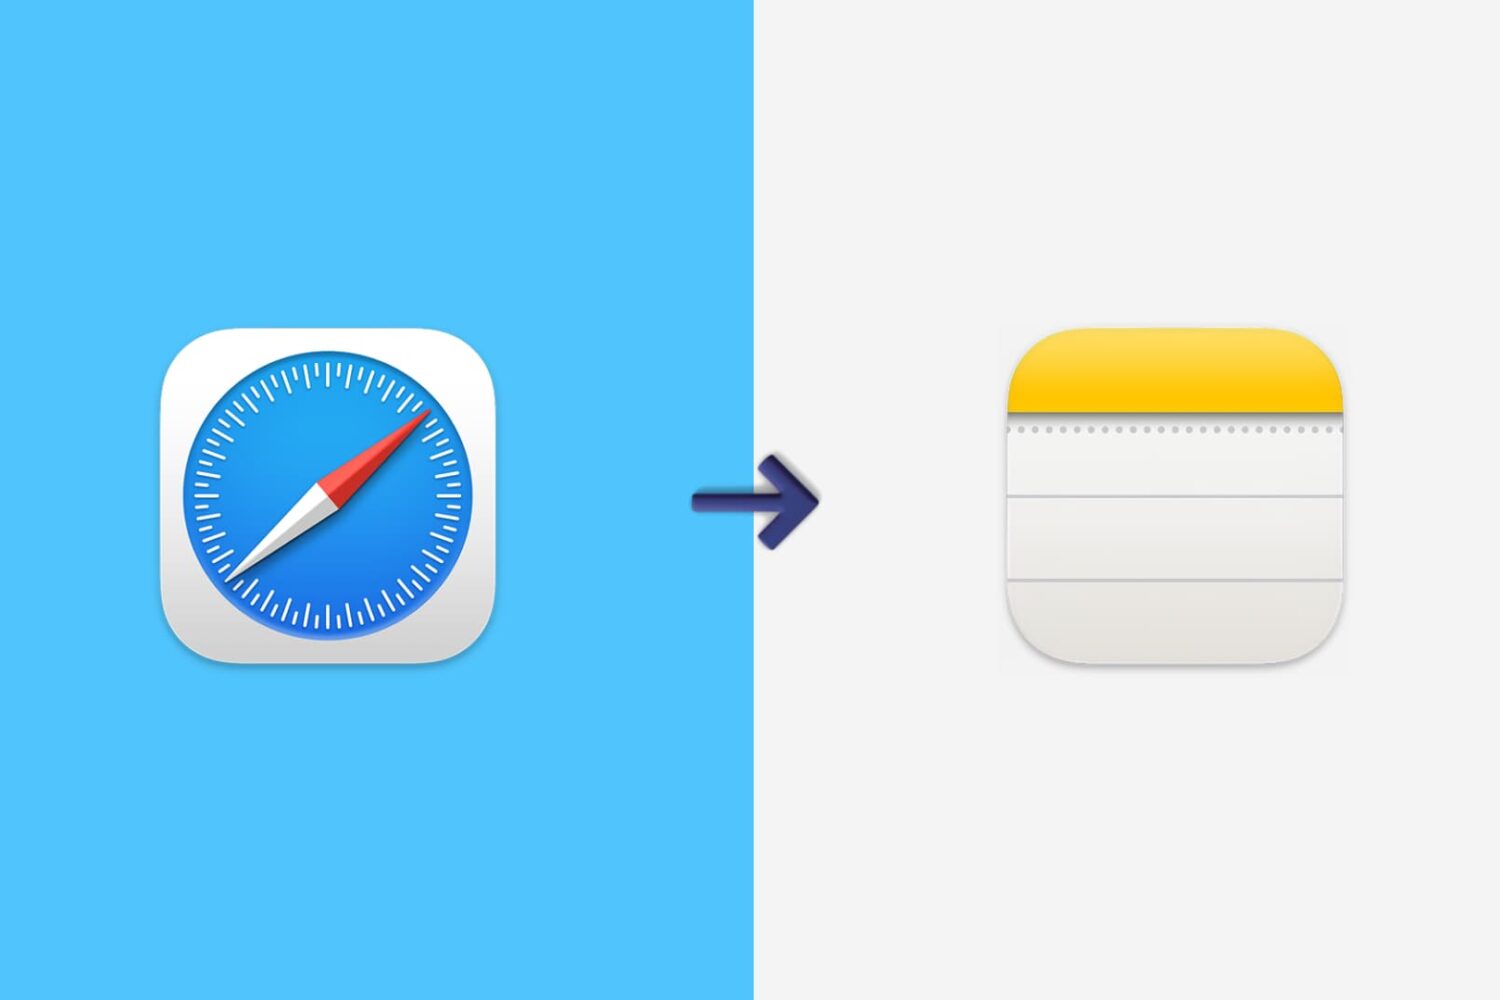 Arrow pointing from Safari to Notes app icon